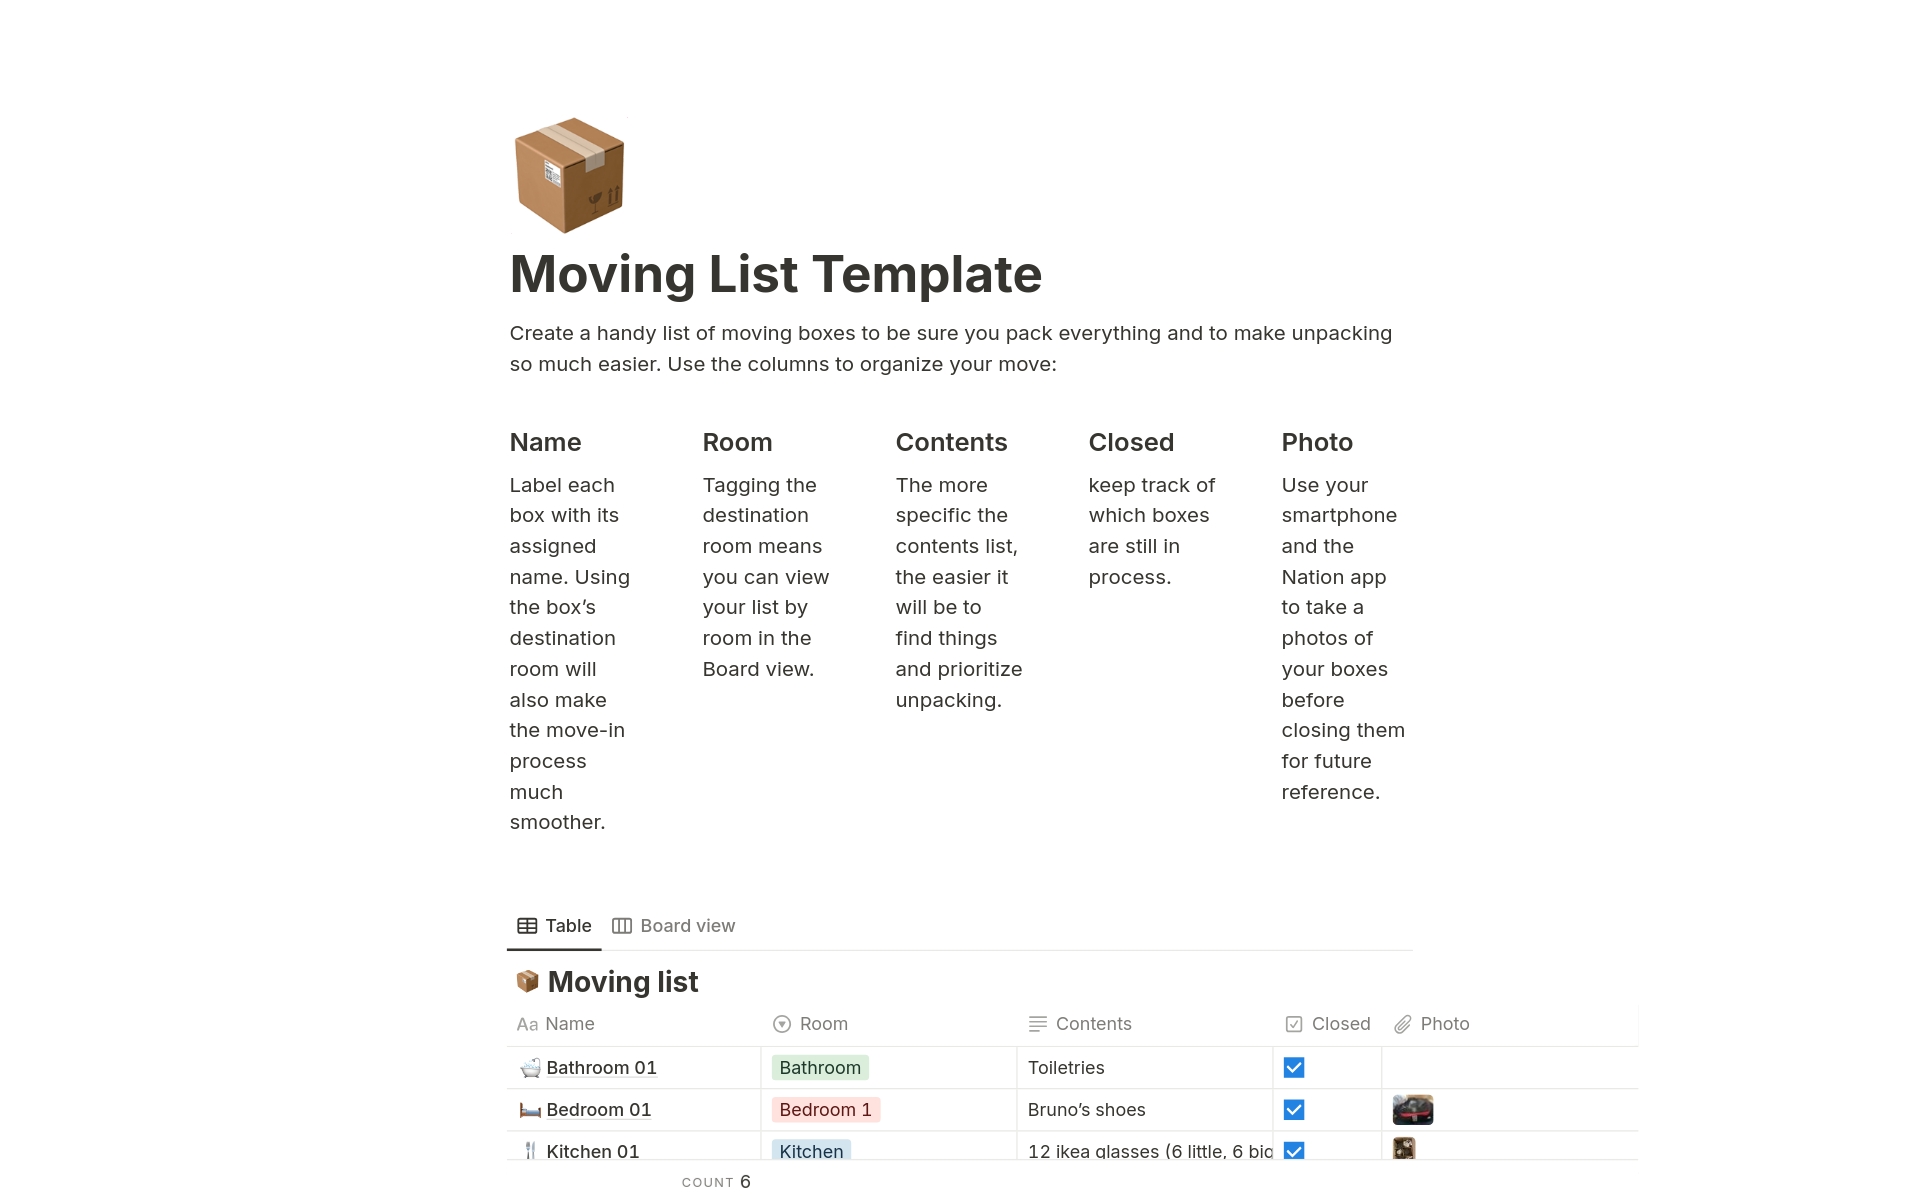 Create a handy list of moving boxes to be sure you pack everything and to make unpacking so much easier.